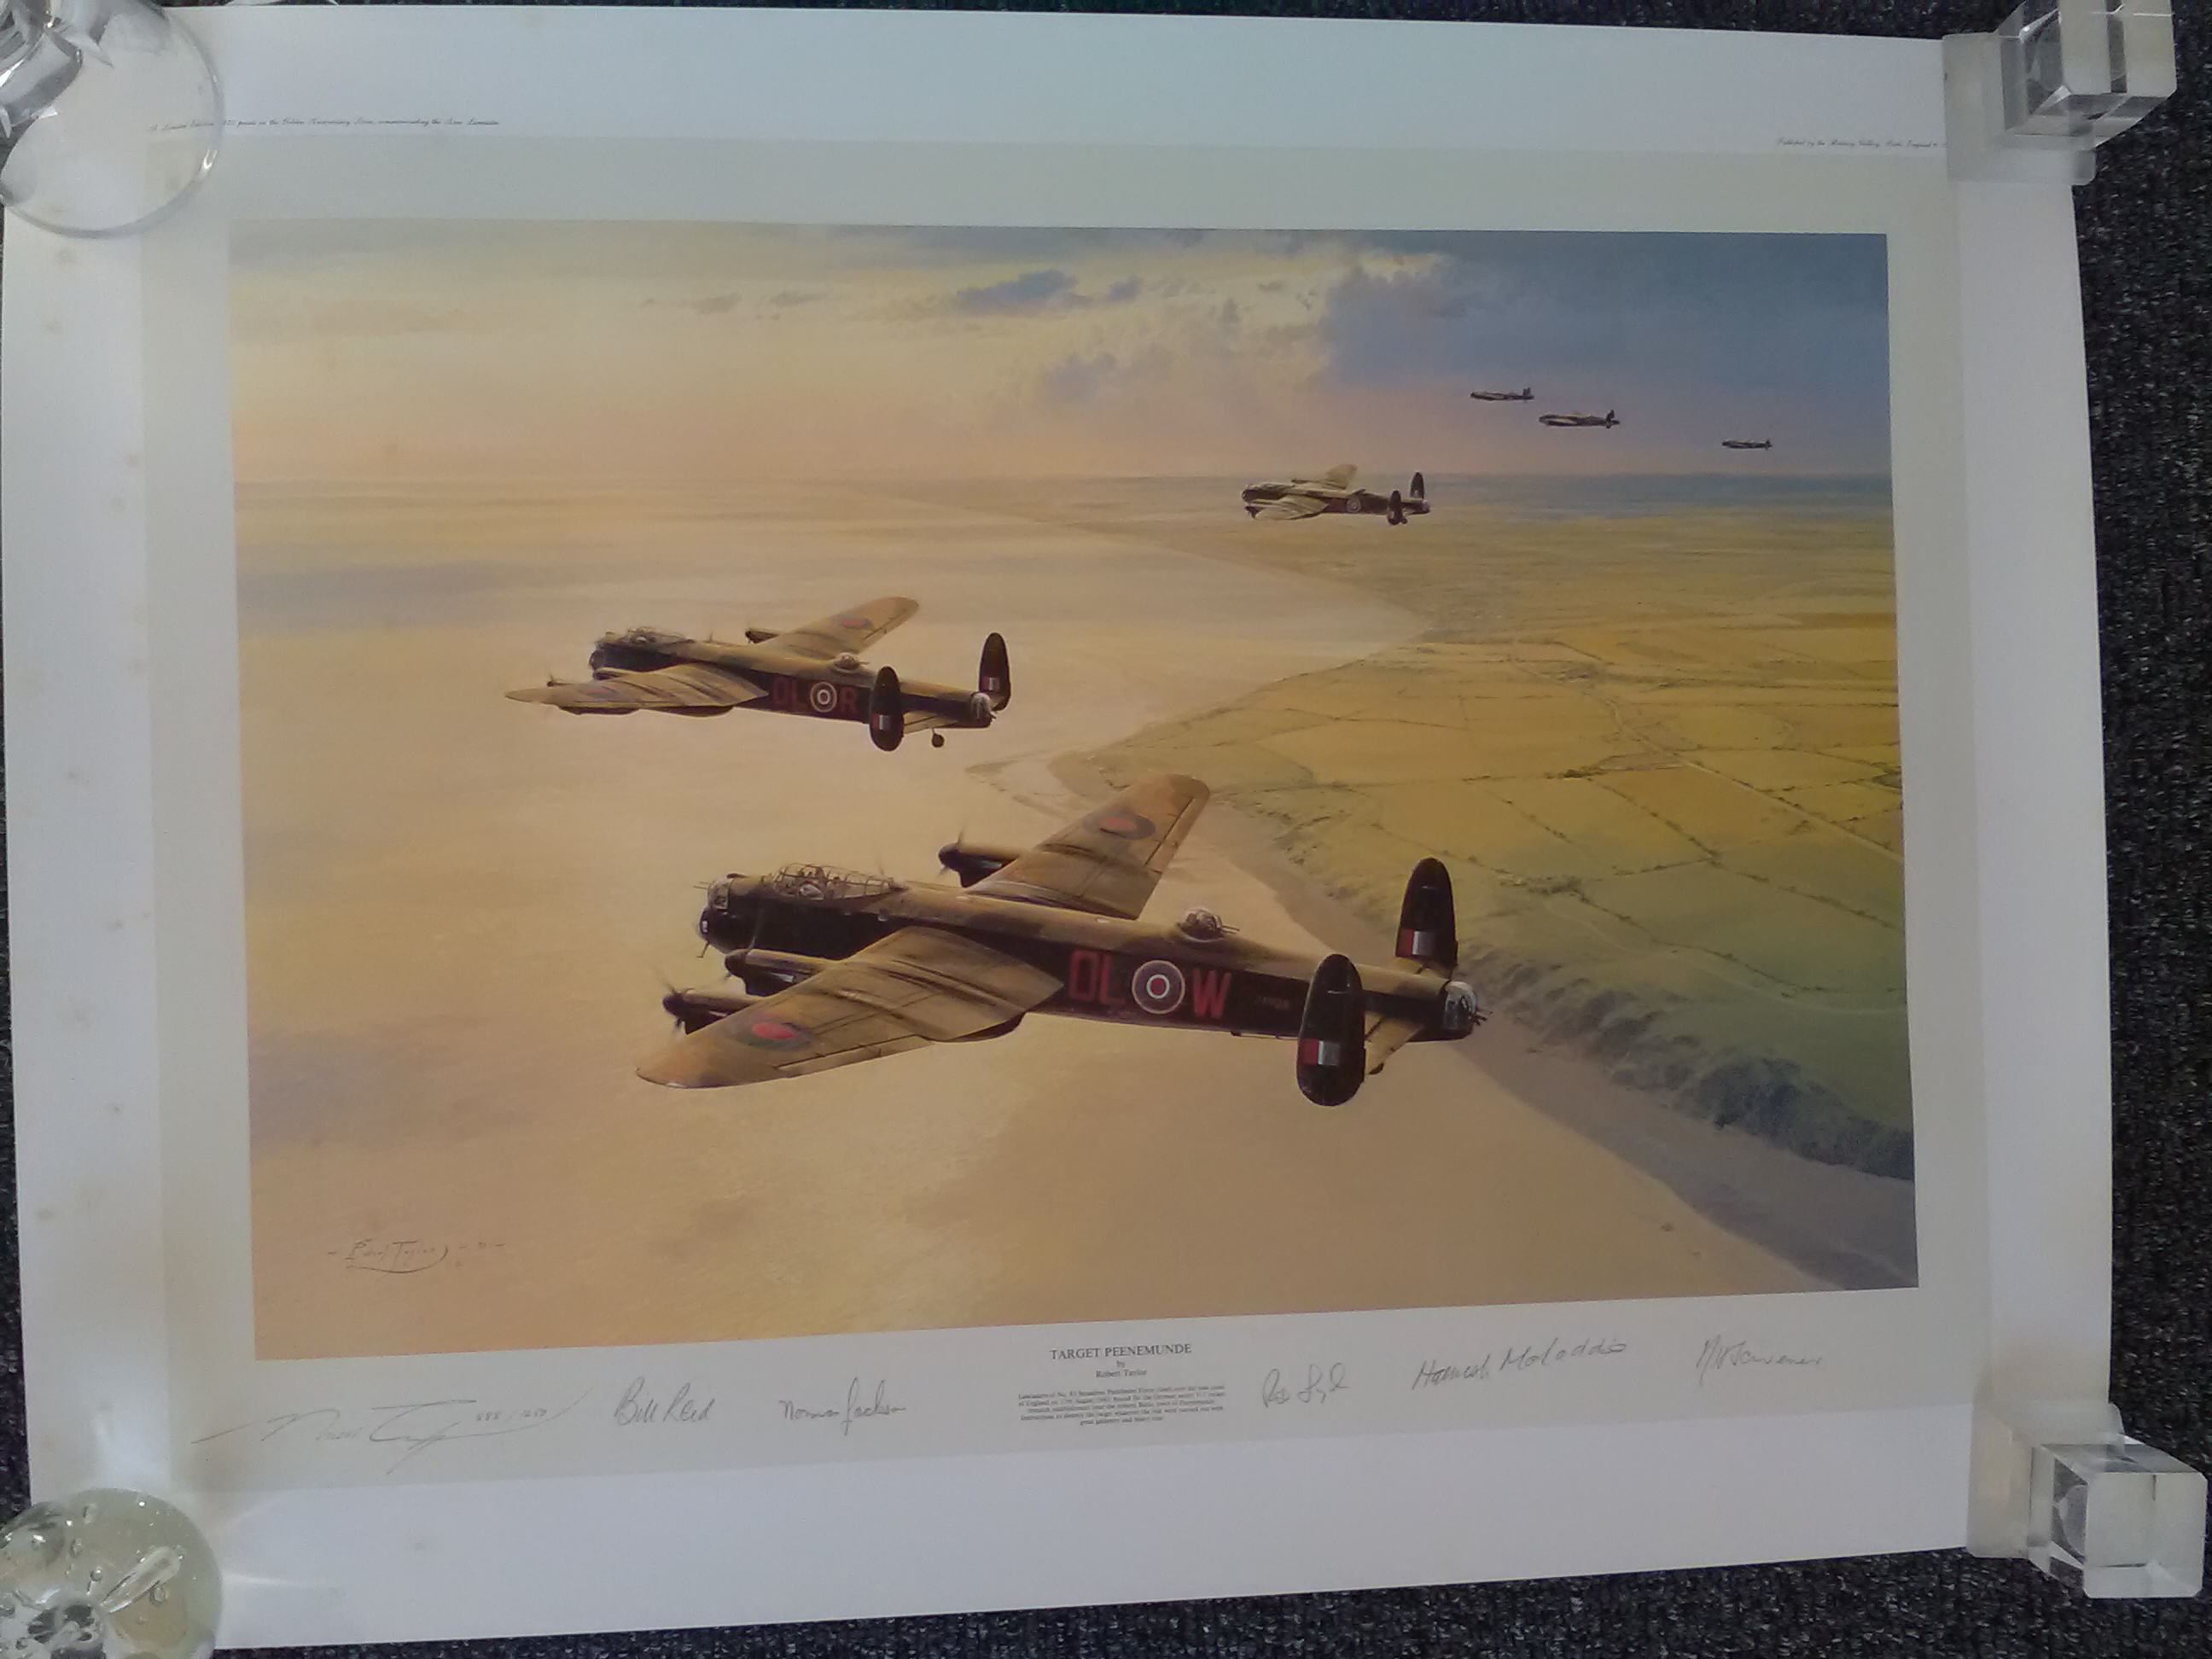 Target Peenemunde multiple signed WW2 Robert Taylor print. 33 x 25 inches. Numbered 588/1250.